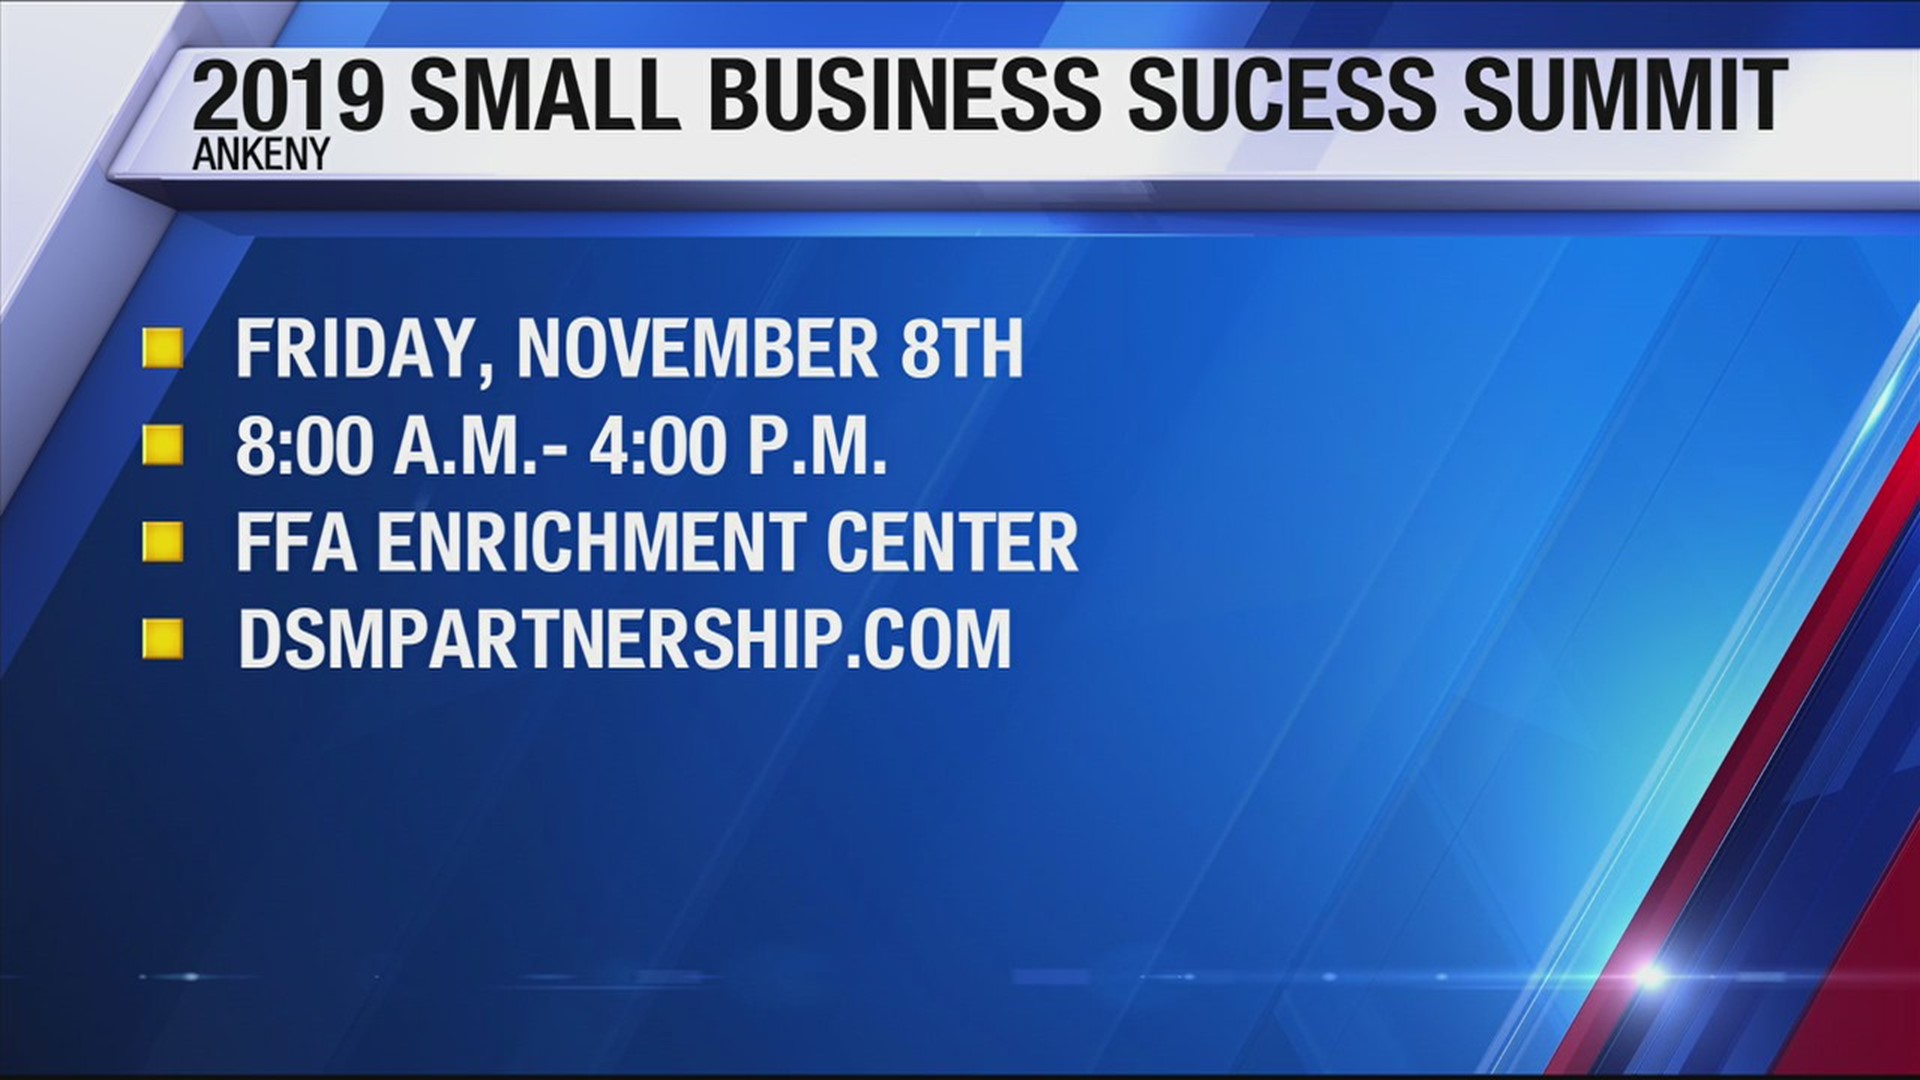 Small Business Success Summit is this Friday, November 8th.